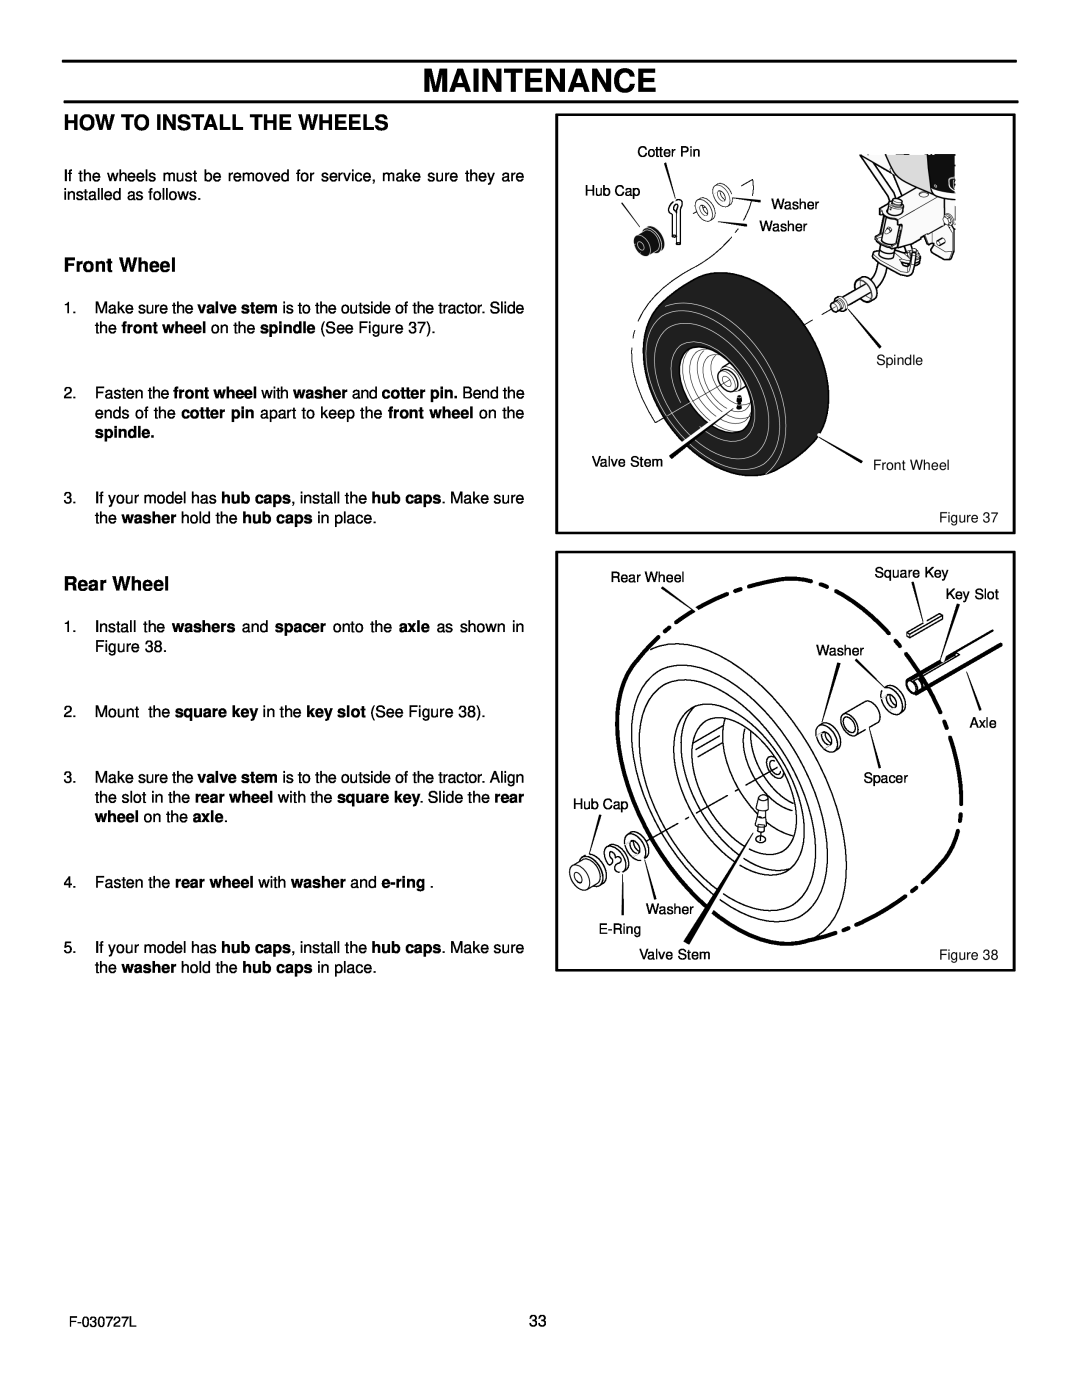 Murray 465600x8A manual Maintenance, How To Install The Wheels, Front Wheel, Rear Wheel 